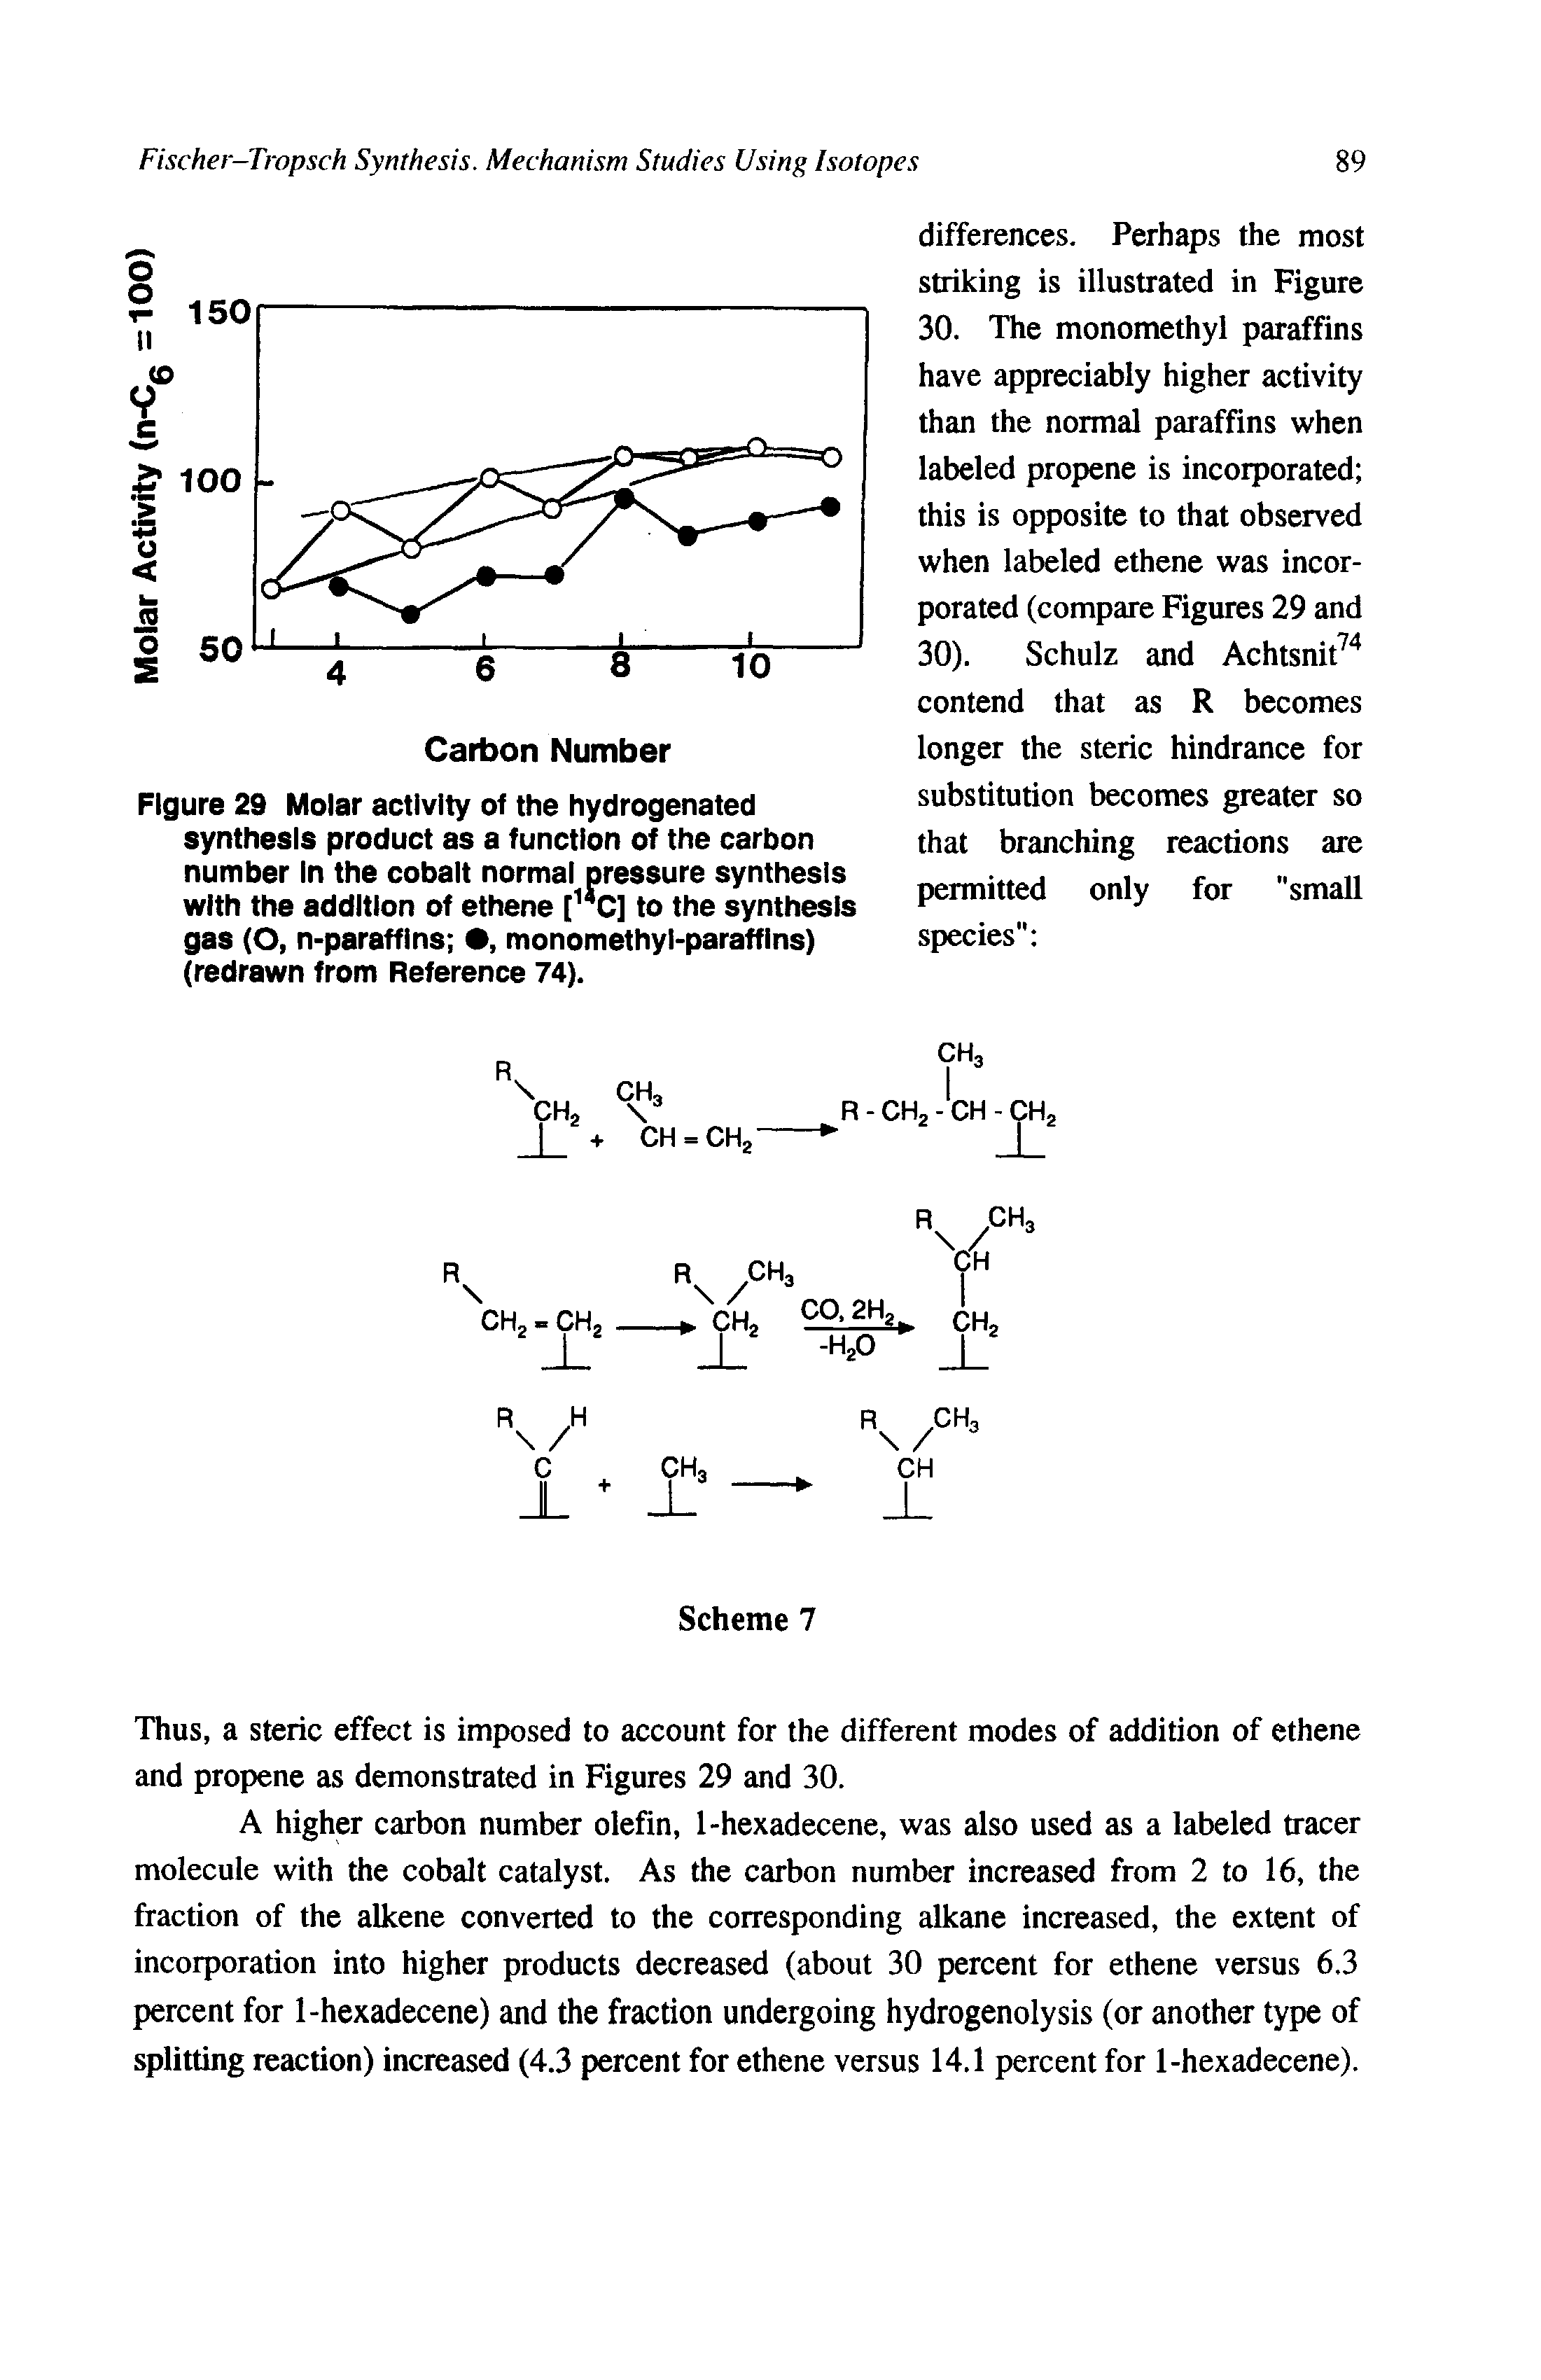 Figure 29 Molar activity of the hydrogenated synthesis product as a function of the carbon number In the cobalt normal pressure synthesis with the addition of ethene [ C] to the synthesis gas (O, n-paraffins , monomethyl-paraffins) (redrawn from Reference 74).